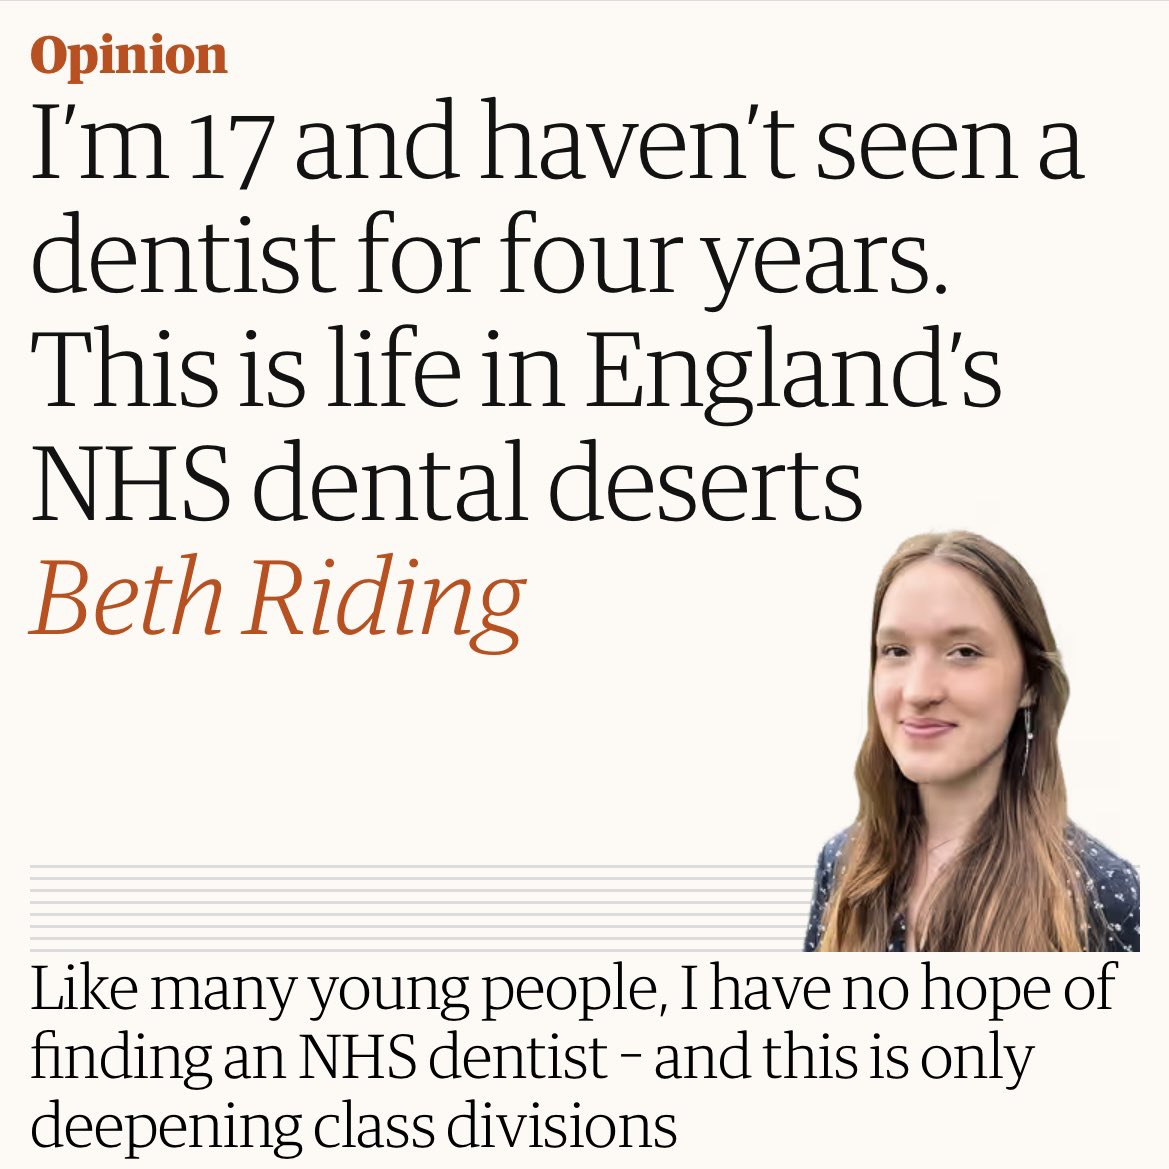 “With lengthy NHS waiting lists and my 18th birthday rapidly approaching, it’s unlikely that I will ever see an NHS dentist again, unless some serious reform occurs.” Beth Riding is an A-level student in Cornwall. The PM needs to read her column. 👇 theguardian.com/commentisfree/…